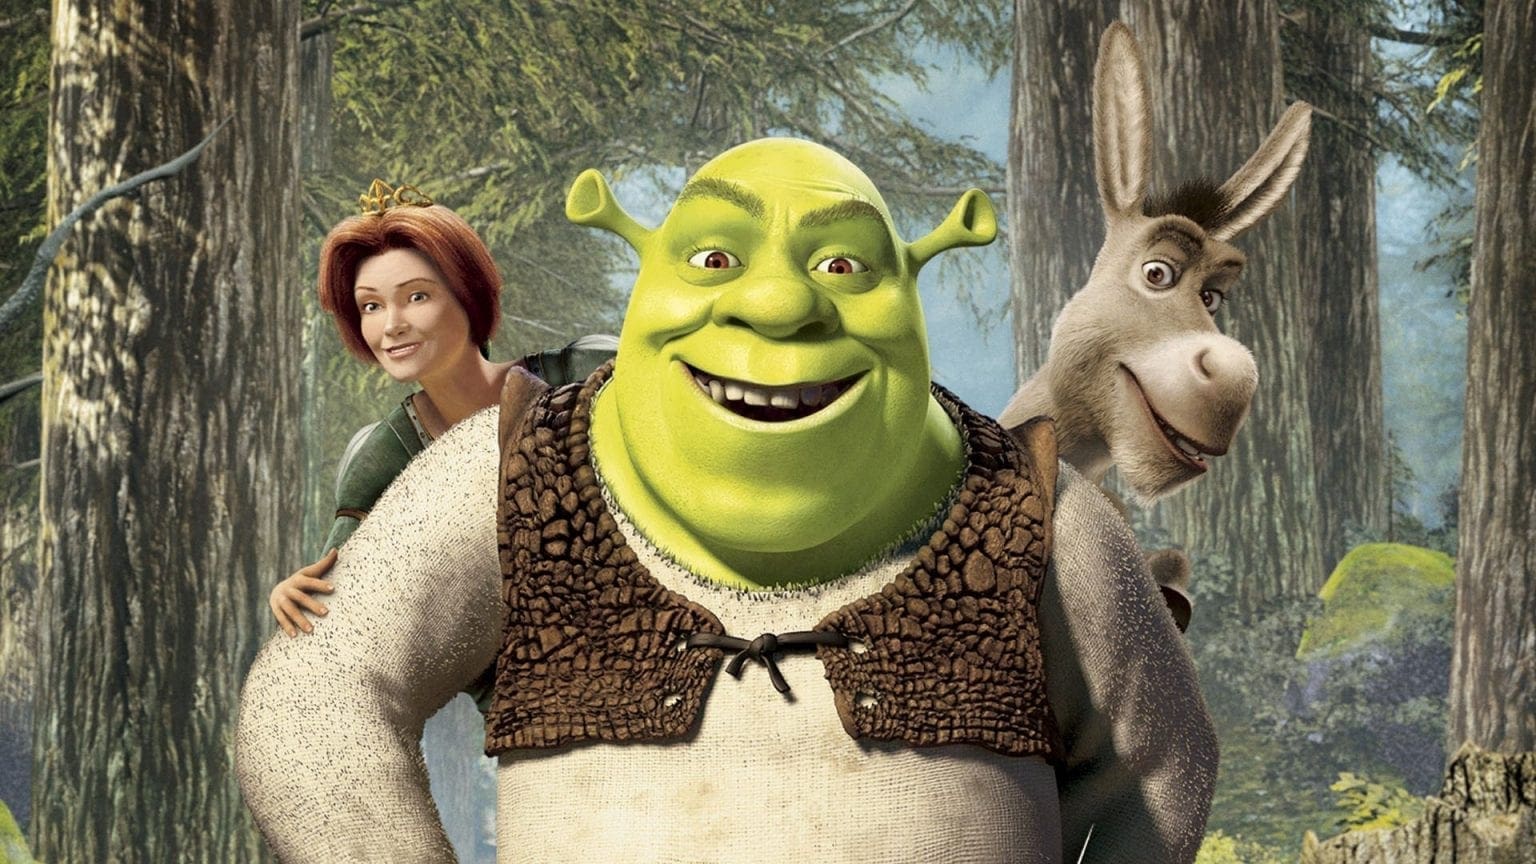 Smash Mouth - All Star (from "Shrek") - YouTube - wide 4